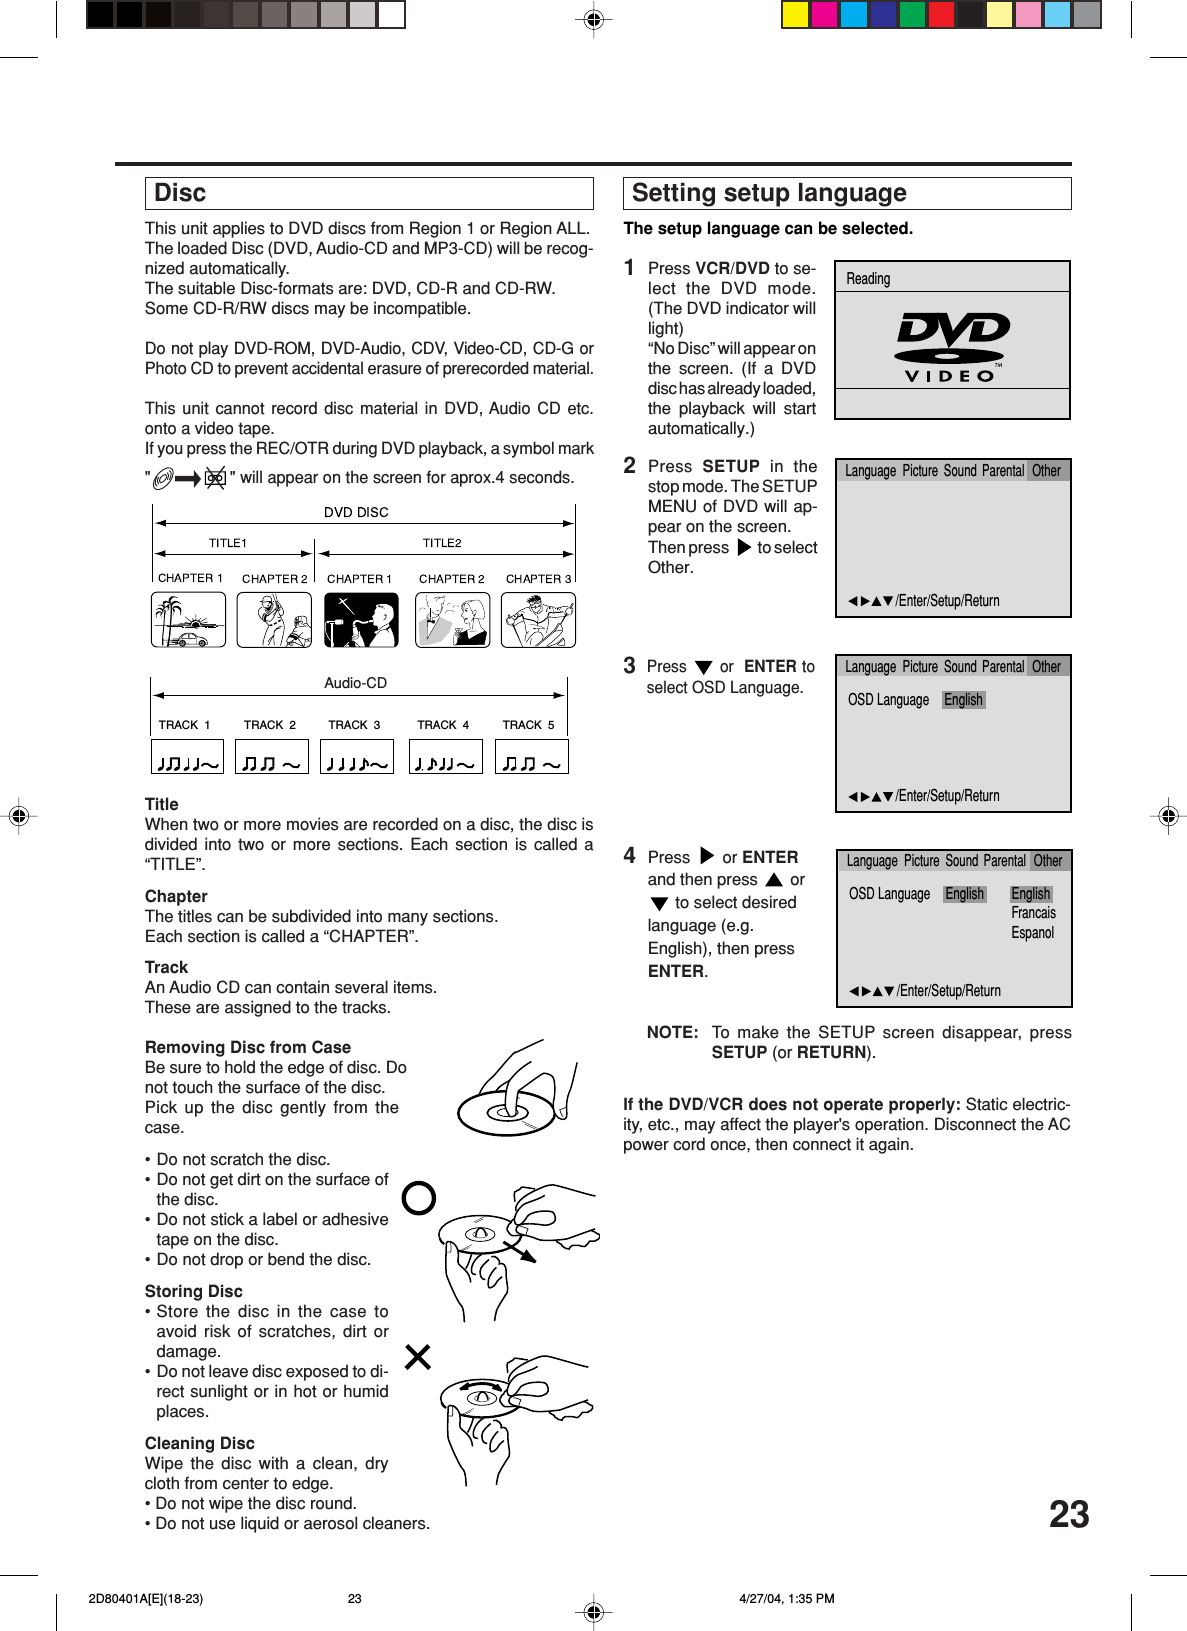 23This unit applies to DVD discs from Region 1 or Region ALL.The loaded Disc (DVD, Audio-CD and MP3-CD) will be recog-nized automatically.The suitable Disc-formats are: DVD, CD-R and CD-RW.Some CD-R/RW discs may be incompatible.Do not play DVD-ROM, DVD-Audio, CDV, Video-CD, CD-G orPhoto CD to prevent accidental erasure of prerecorded material.This unit cannot record disc material in DVD, Audio CD etc.onto a video tape.If you press the REC/OTR during DVD playback, a symbol mark&quot;&quot; will appear on the screen for aprox.4 seconds.TRACK  1 TRACK  2 TRACK  3 TRACK  4 TRACK  5CDTitleWhen two or more movies are recorded on a disc, the disc isdivided into two or more sections. Each section is called a“TITLE”.ChapterThe titles can be subdivided into many sections.Each section is called a “CHAPTER”.TrackAn Audio CD can contain several items.These are assigned to the tracks.Removing Disc from CaseBe sure to hold the edge of disc. Donot touch the surface of the disc.Pick up the disc gently from thecase.•Do not scratch the disc.•Do not get dirt on the surface ofthe disc.•Do not stick a label or adhesivetape on the disc.•Do not drop or bend the disc.Storing Disc•Store the disc in the case toavoid risk of scratches, dirt ordamage.•Do not leave disc exposed to di-rect sunlight or in hot or humidplaces.Cleaning DiscWipe the disc with a clean, drycloth from center to edge.• Do not wipe the disc round.• Do not use liquid or aerosol cleaners. DiscAudio-CD Setting setup language4The setup language can be selected.Press   or ENTERand then press   or to select desiredlanguage (e.g.English), then pressENTER.2Press  SETUP in thestop mode. The SETUPMENU of DVD will ap-pear on the screen.Then press   to selectOther.NOTE: To  make the SETUP screen disappear, pressSETUP (or RETURN).If the DVD/VCR does not operate properly: Static electric-ity, etc., may affect the player&apos;s operation. Disconnect the ACpower cord once, then connect it again.3Press   or  ENTER toselect OSD Language.1Press VCR/DVD to se-lect the DVD mode.(The DVD indicator willlight)“No Disc” will appear onthe screen. (If a DVDdisc has already loaded,the playback will startautomatically.)OSD Language English EnglishFrancaisEspanol/Enter/Setup/ReturnLanguage Picture Parental OtherSoundOSD Language English/Enter/Setup/ReturnLanguage Picture Parental OtherSound/Enter/Setup/ReturnLanguage Picture Parental OtherSoundReading 2D80401A[E](18-23) 4/27/04, 1:35 PM23